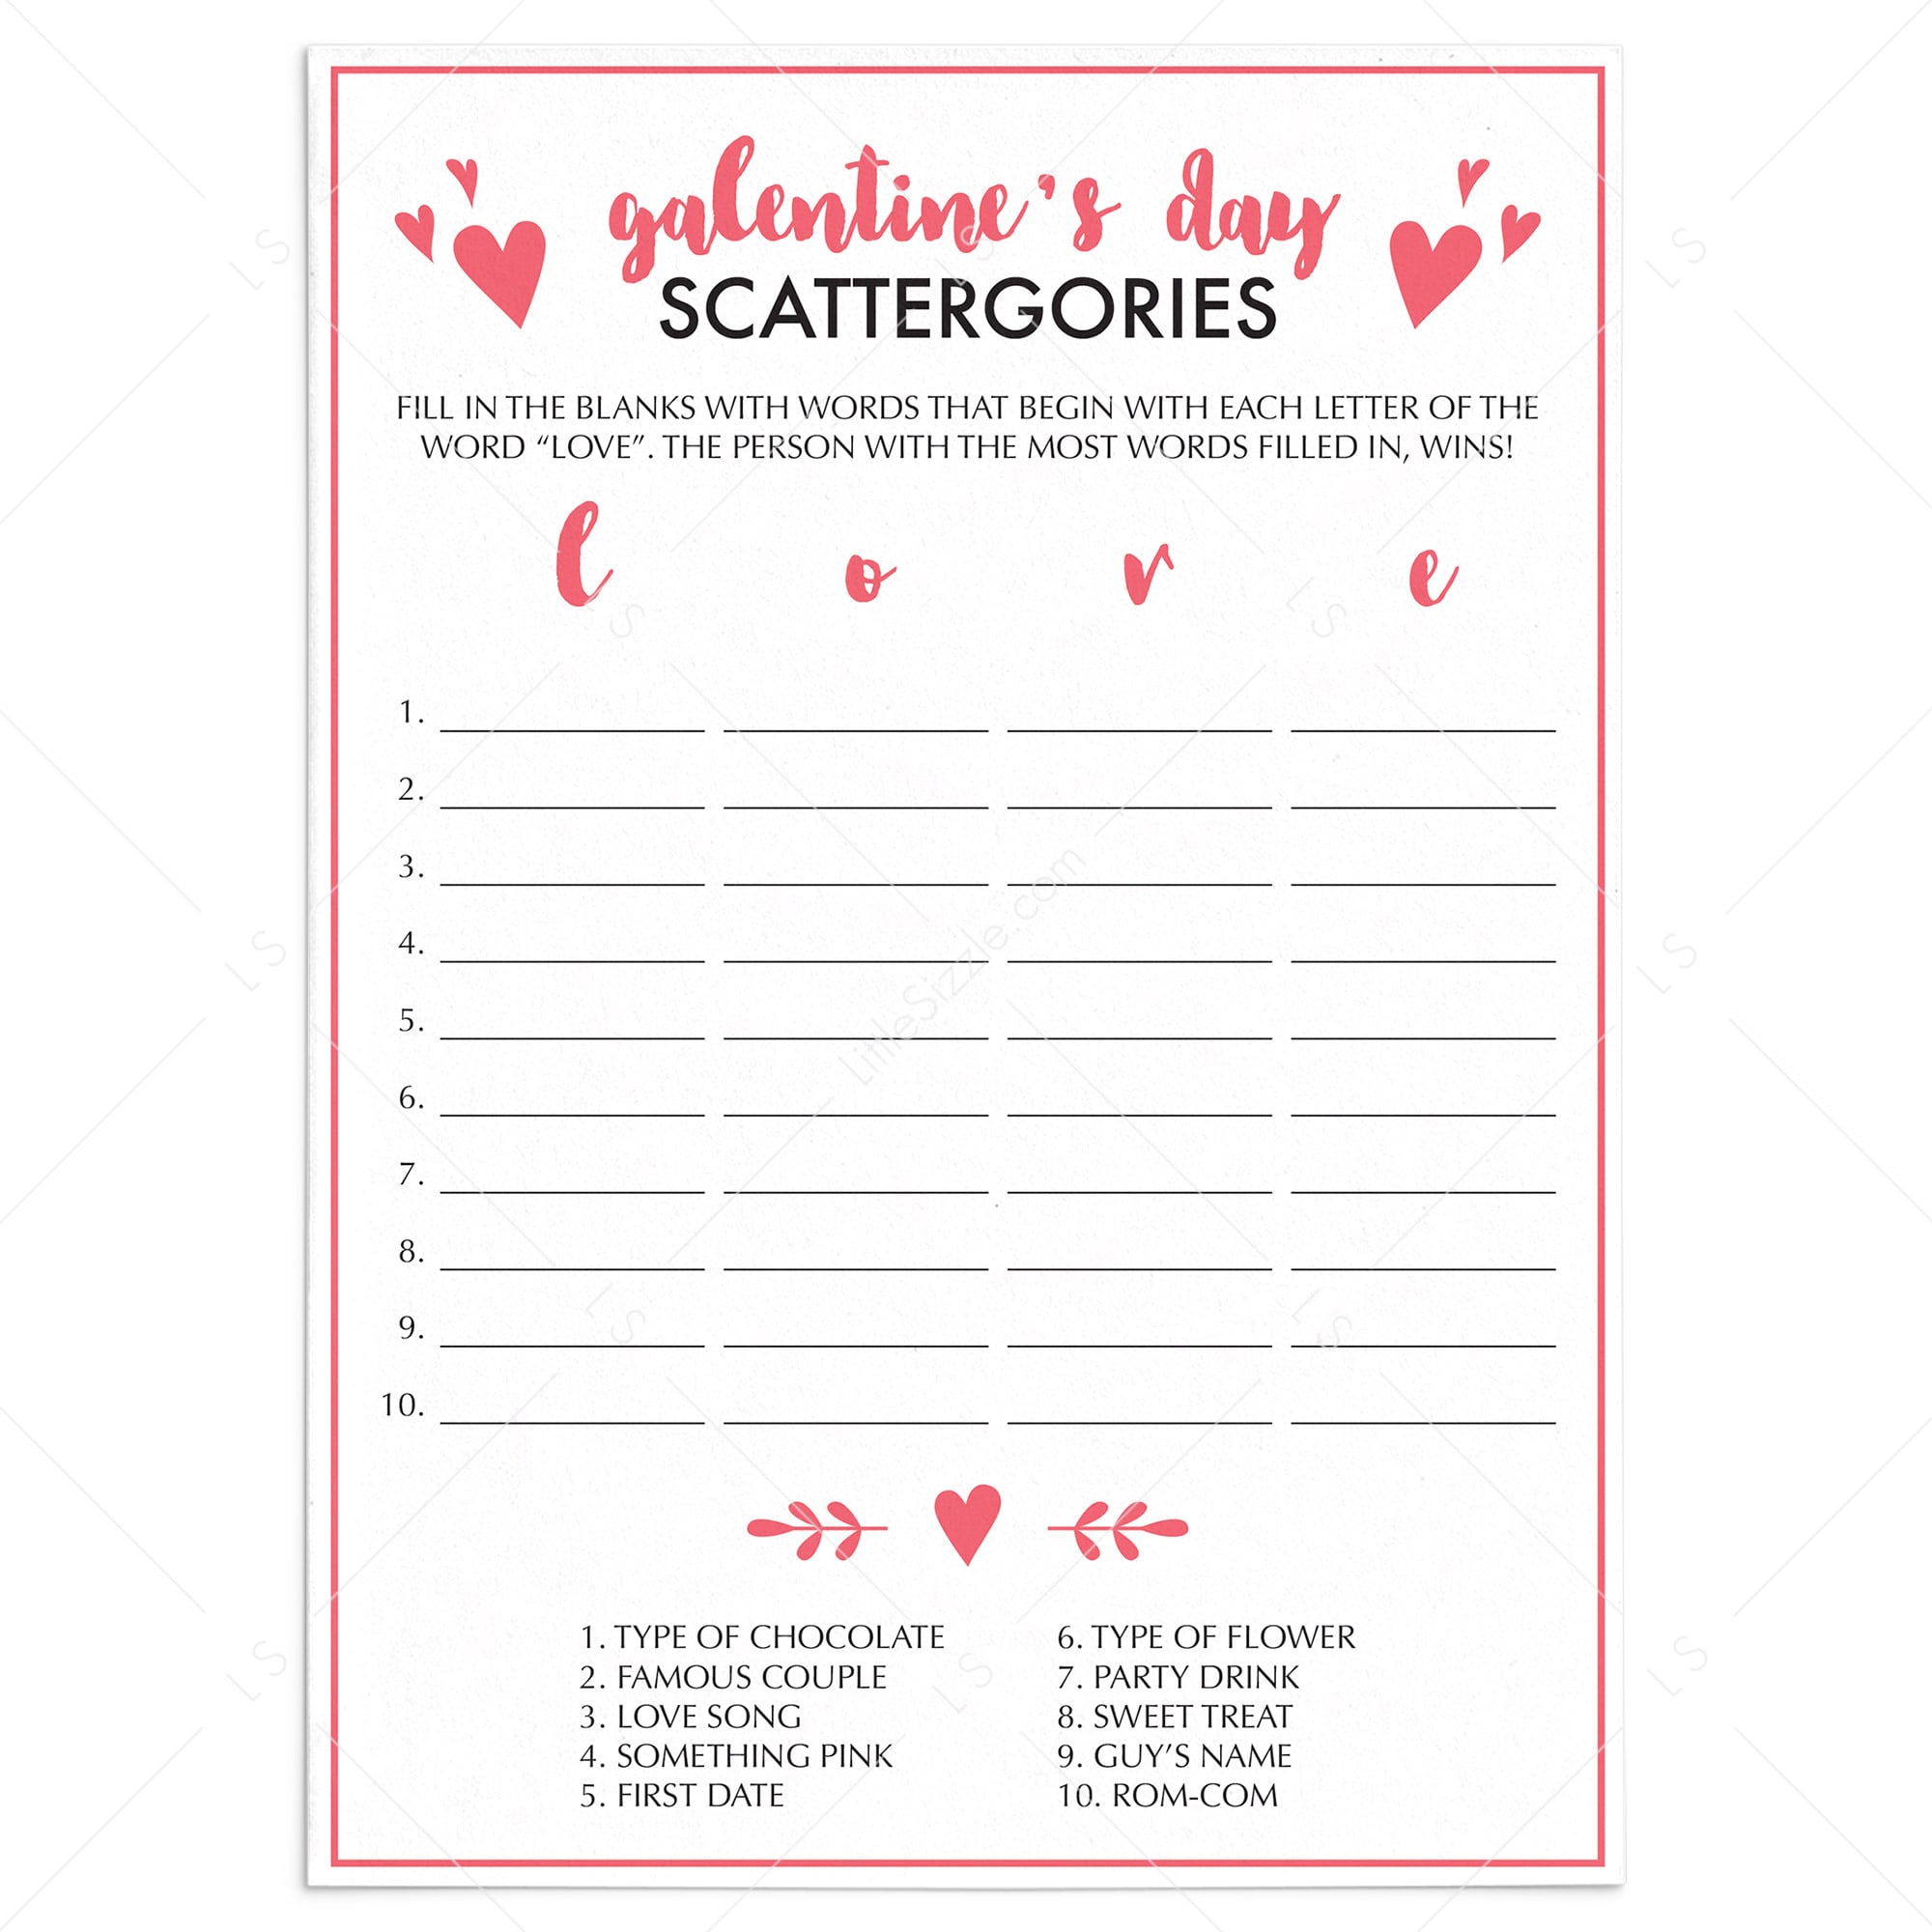 Printable and Virtual Scattergories Game for Galentine's Day Party by LittleSizzle